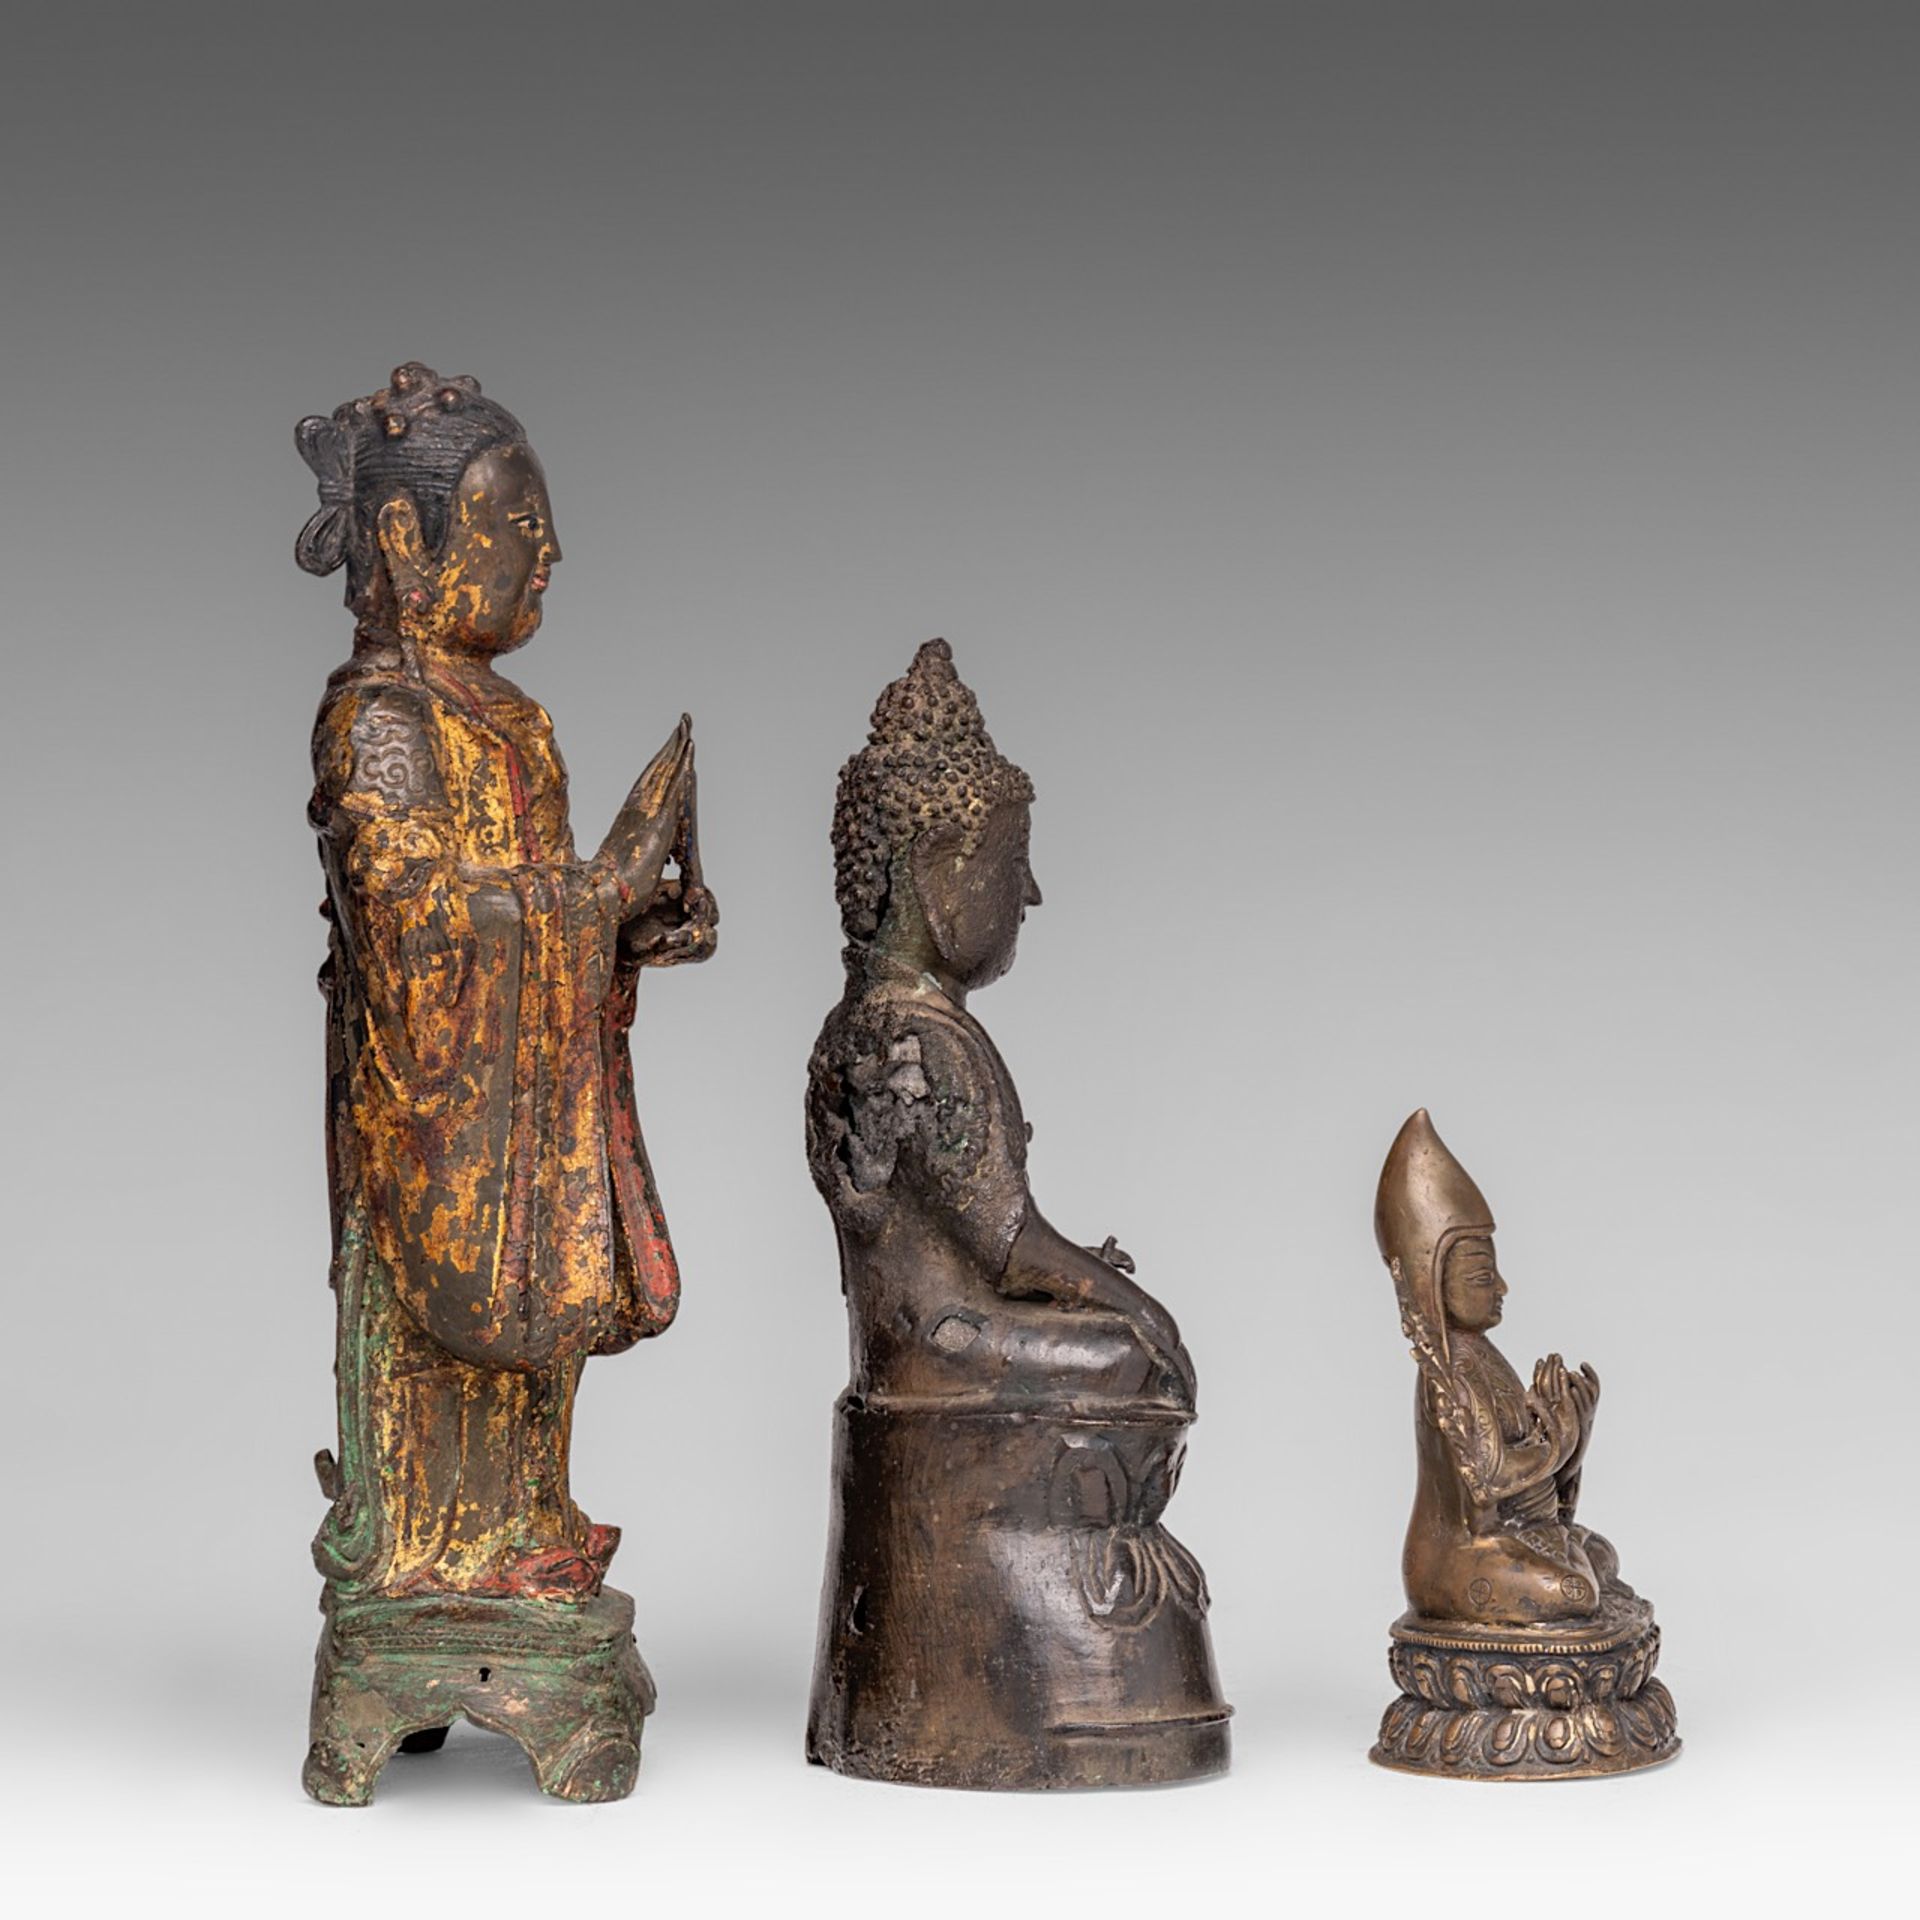 Three Chinese (lacquered) bronze figures of Buddha or an Immortal, Ming and 19thC, tallest H 26,5 cm - Image 5 of 7